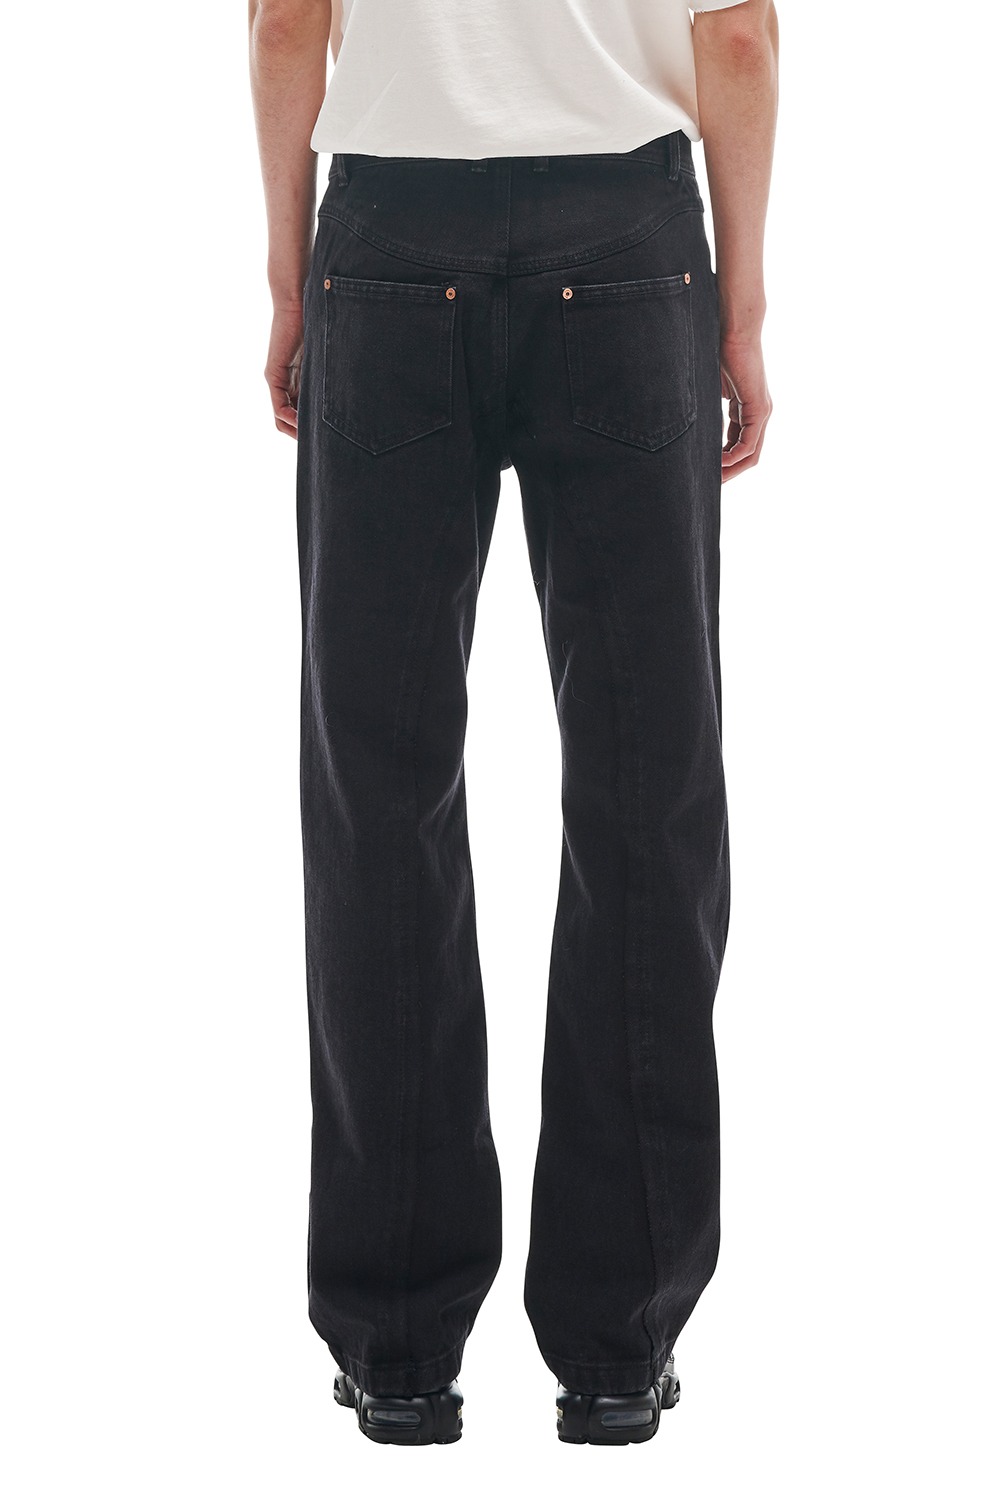 TIMOTHY PANEL WIDE JEANS (BLACK)